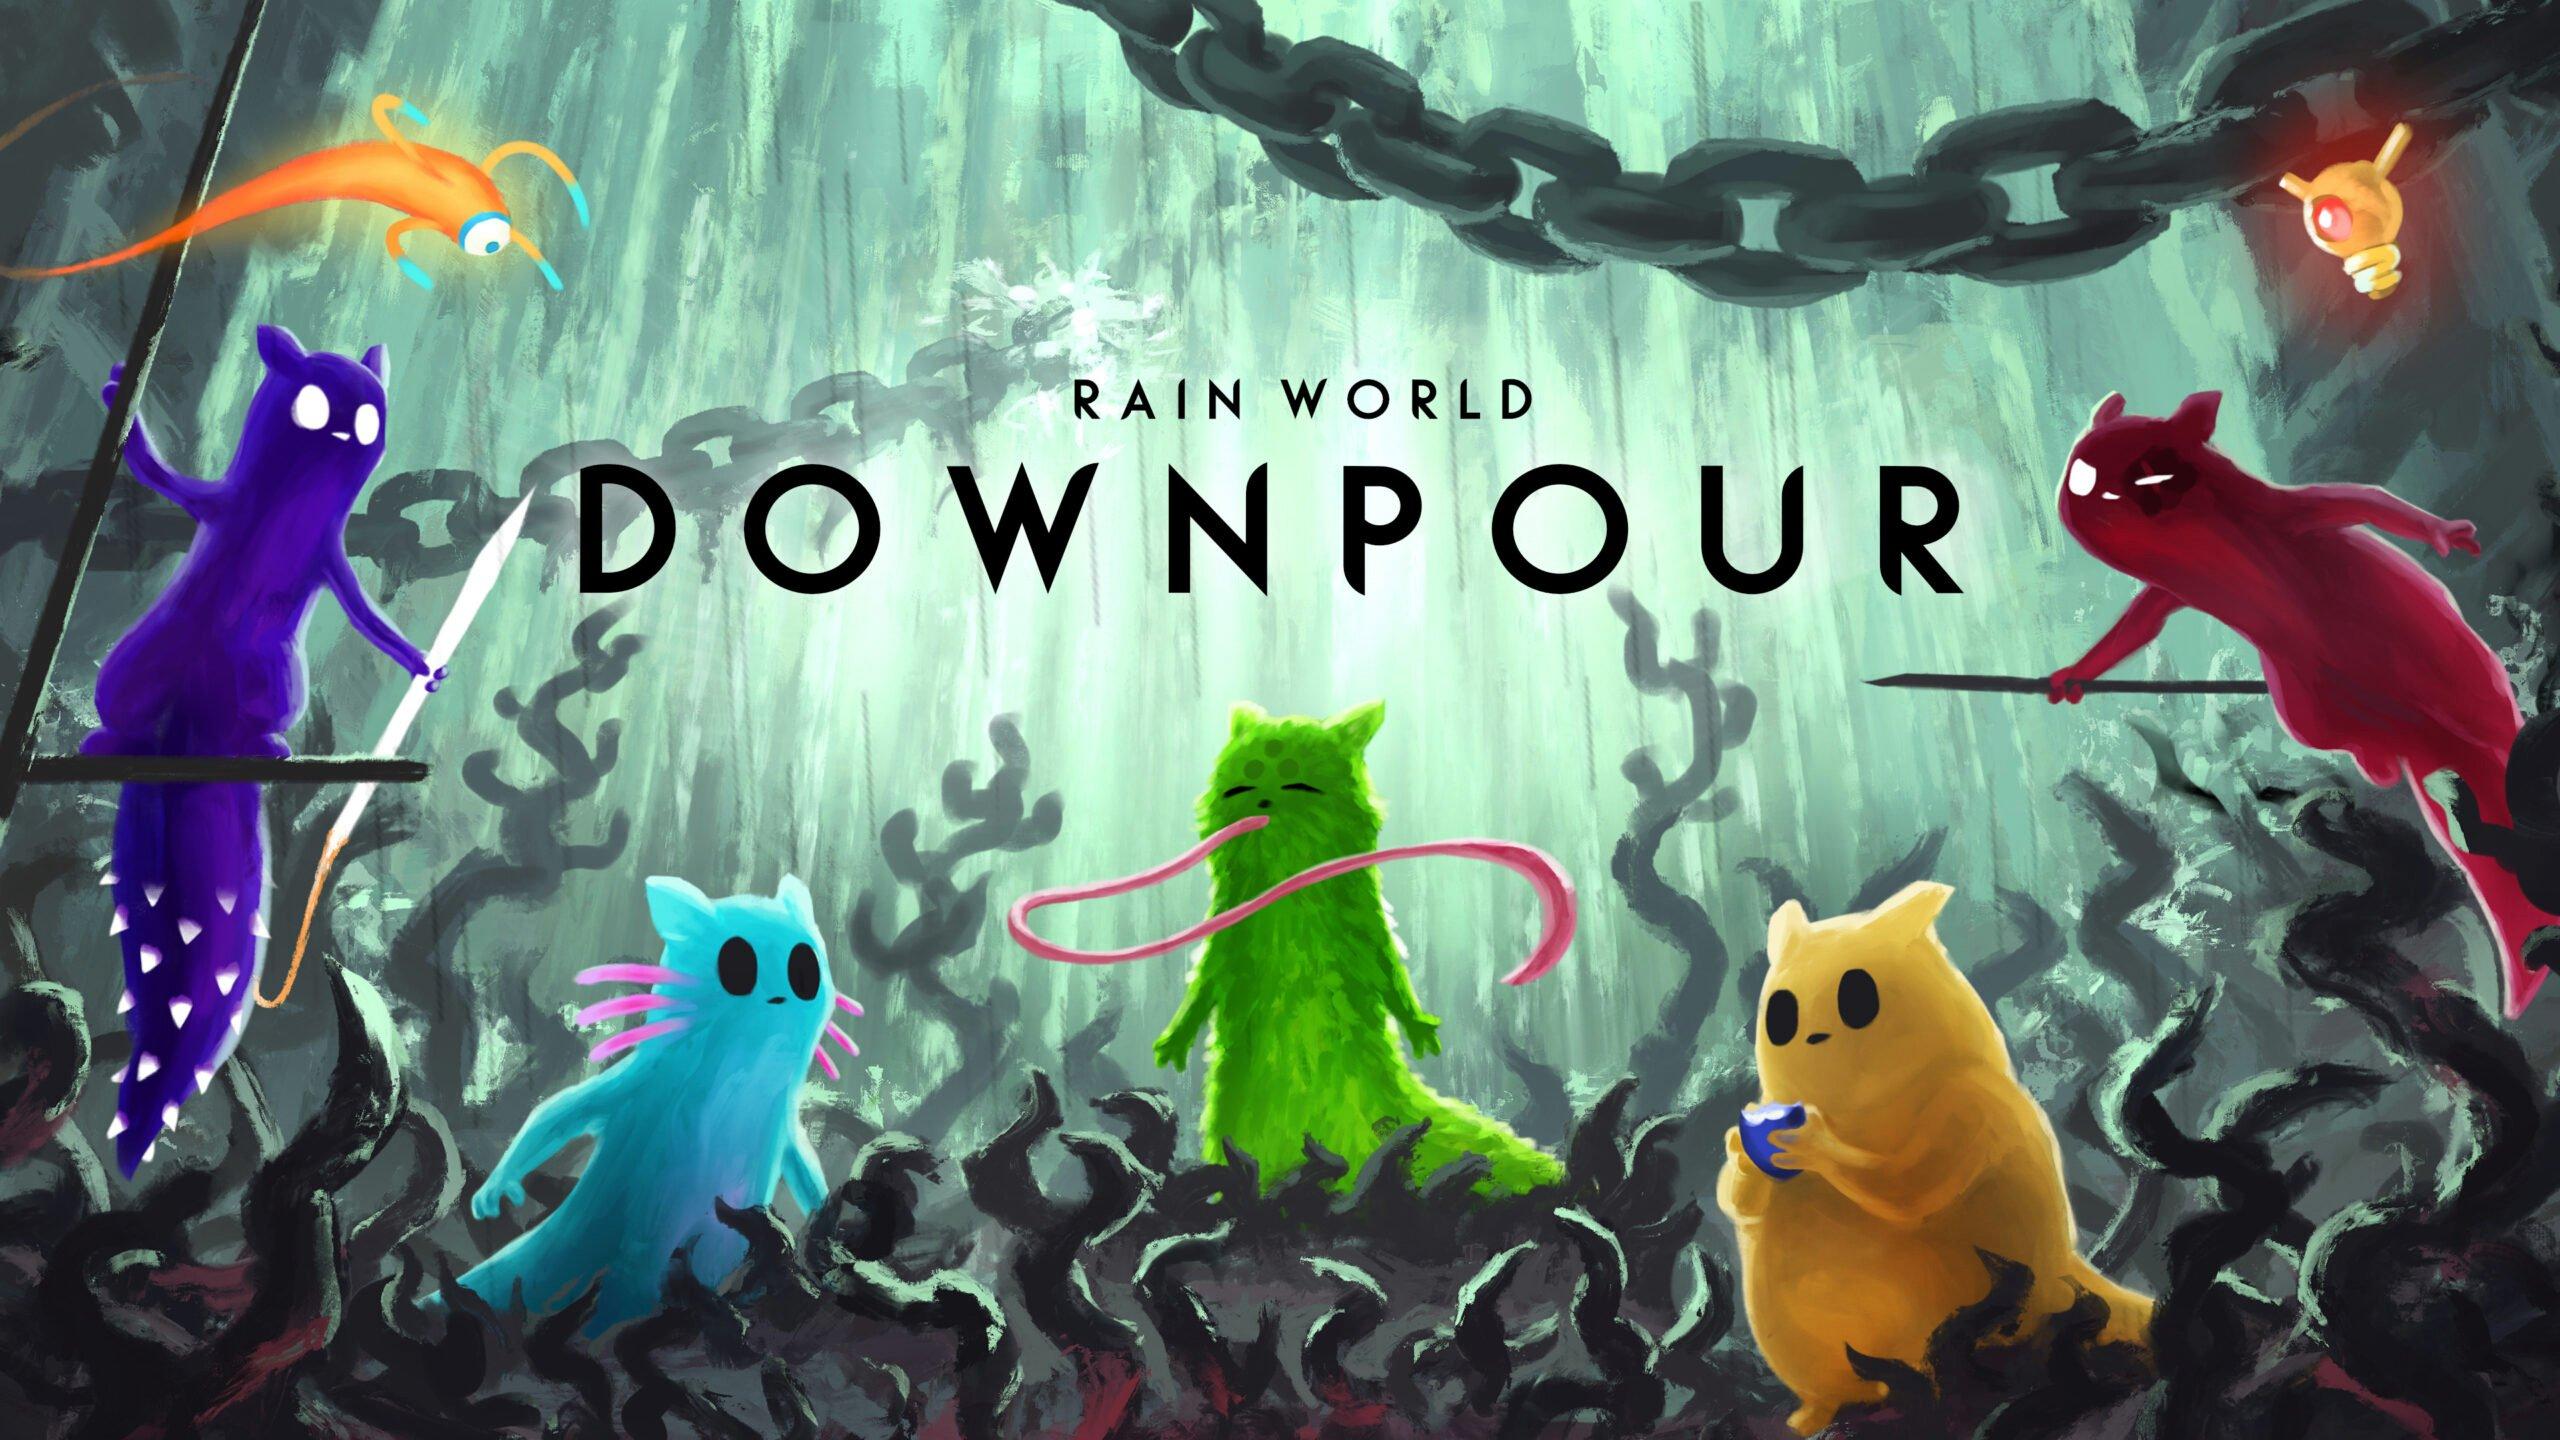 Rain World's Downpour DLC to include 4-player local co-op